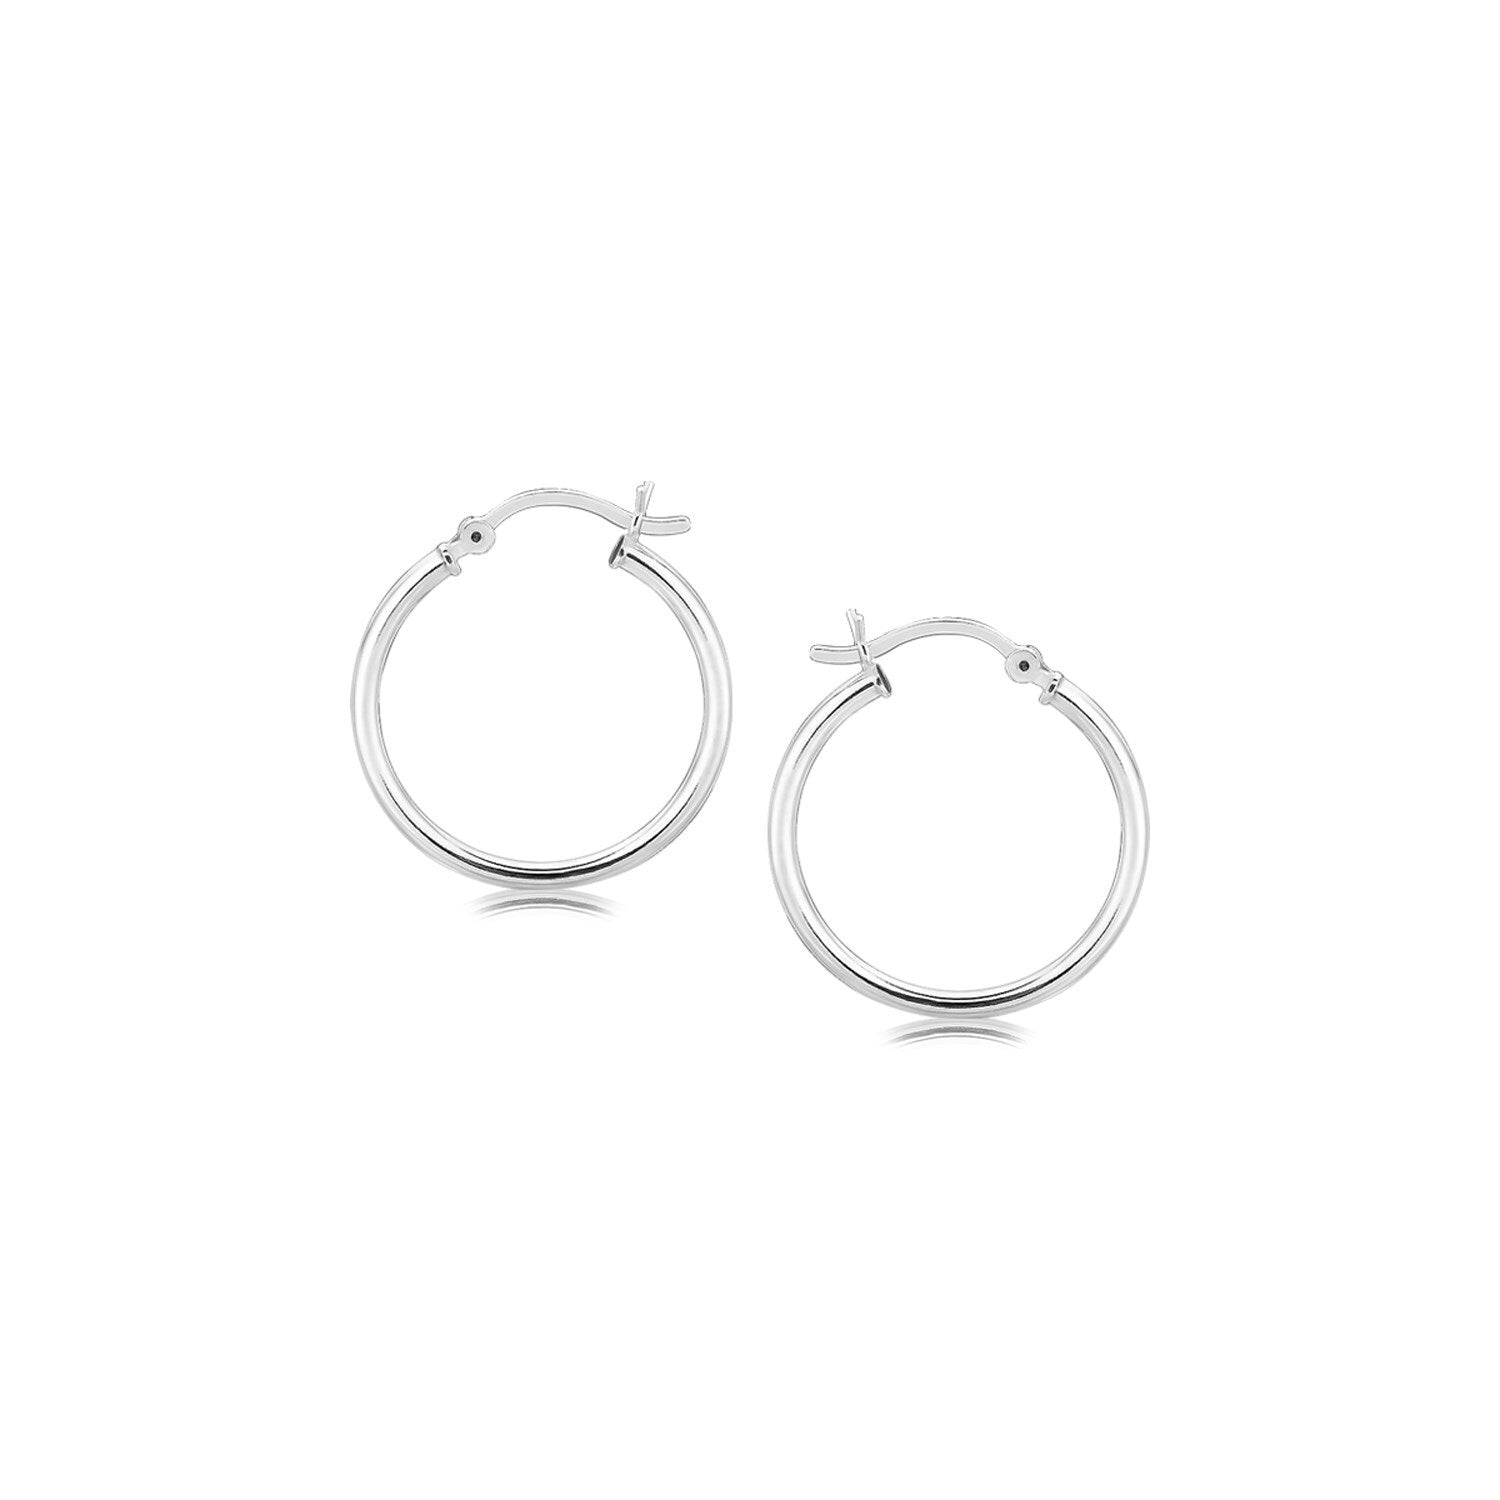 Sterling Silver Polished Thin Hoop Earrings with Rhodium Plating (20mm)